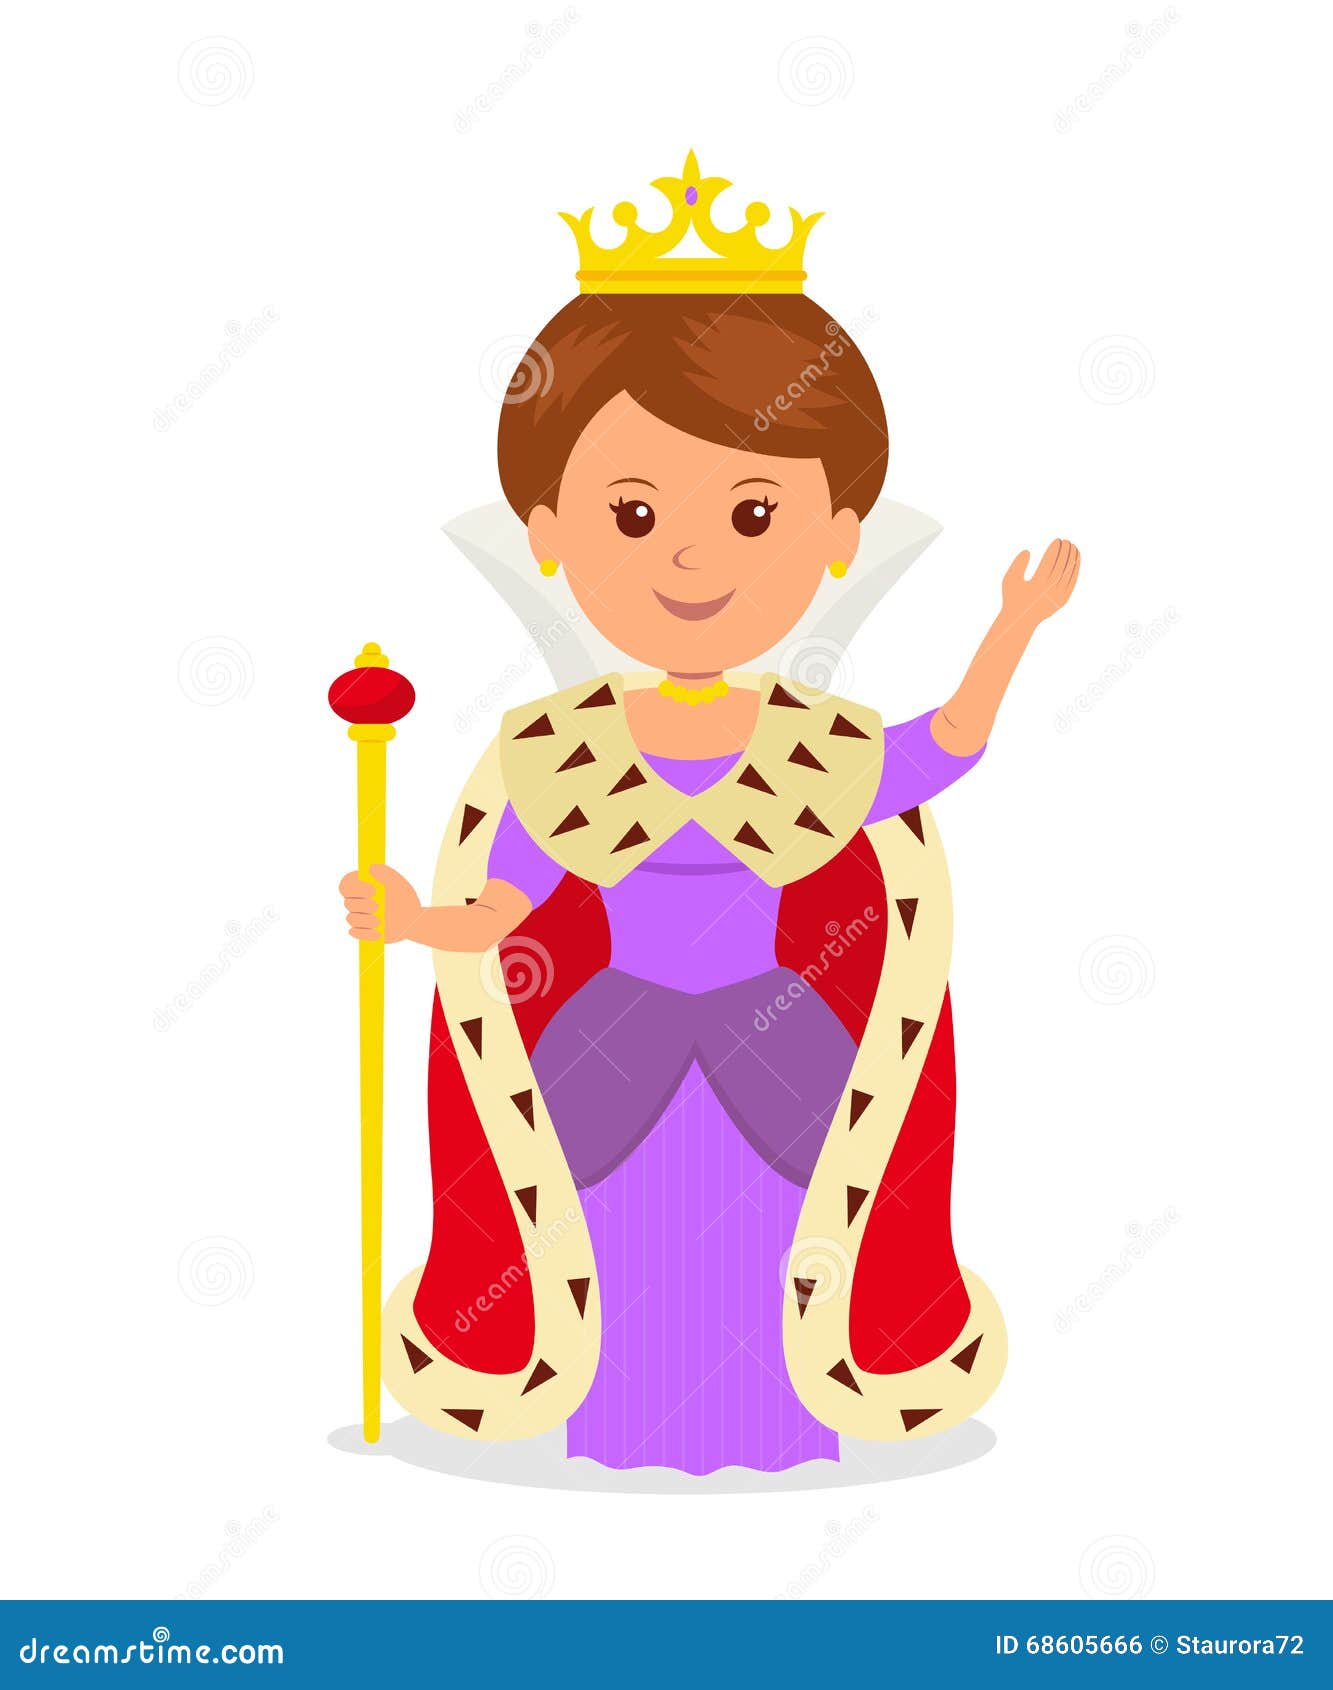 cute girl queen. female character in a princess costume with a crown and scepter on a white background